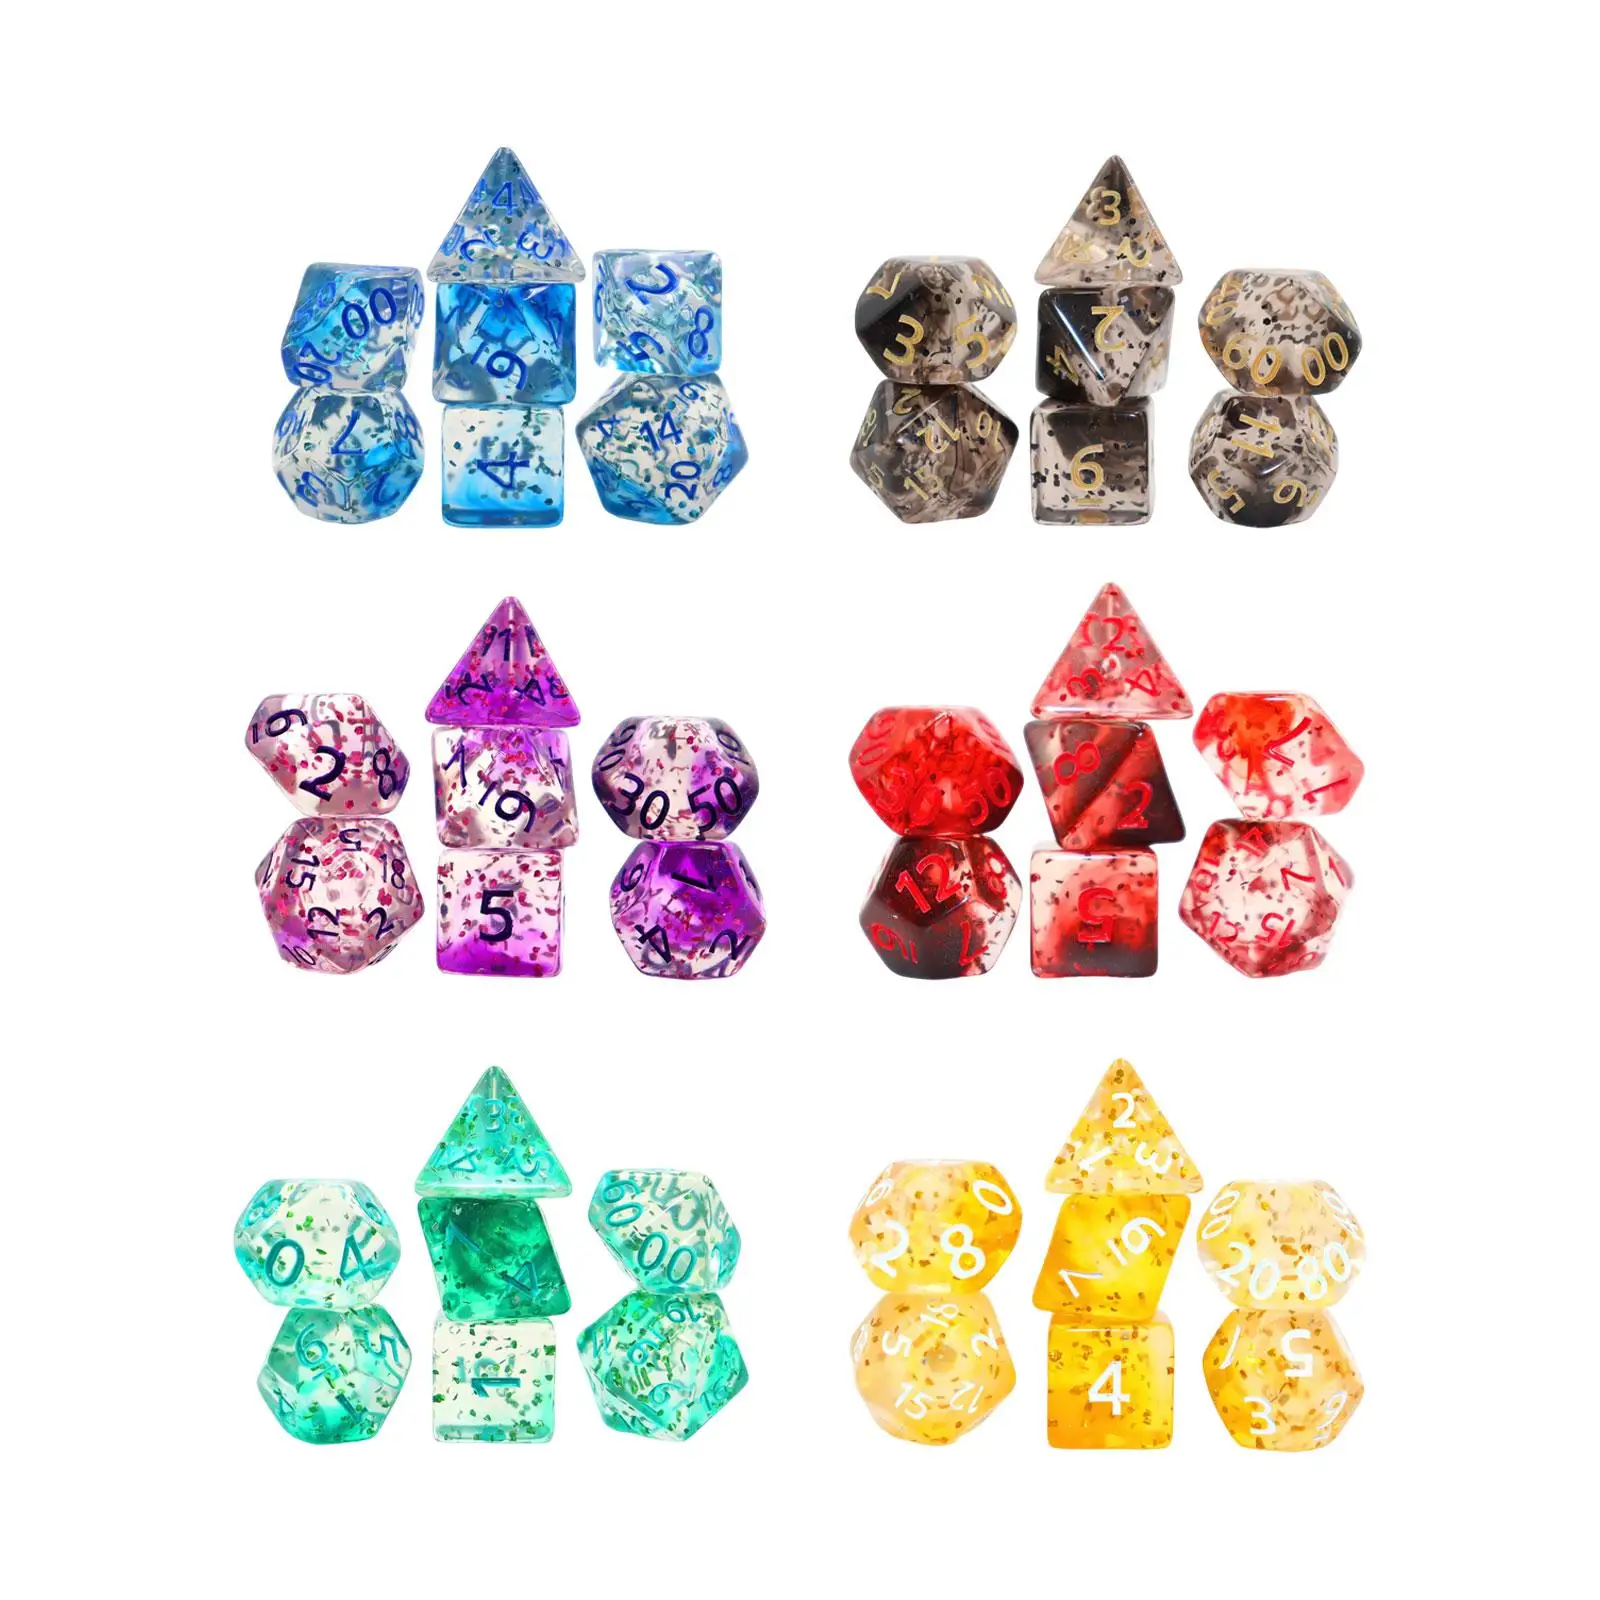 7 Pieces Polyhedral Dices Set Table Game Dices for Role Playing Drinking Prop Table Game Tabletop Adventure Games Party Supplies